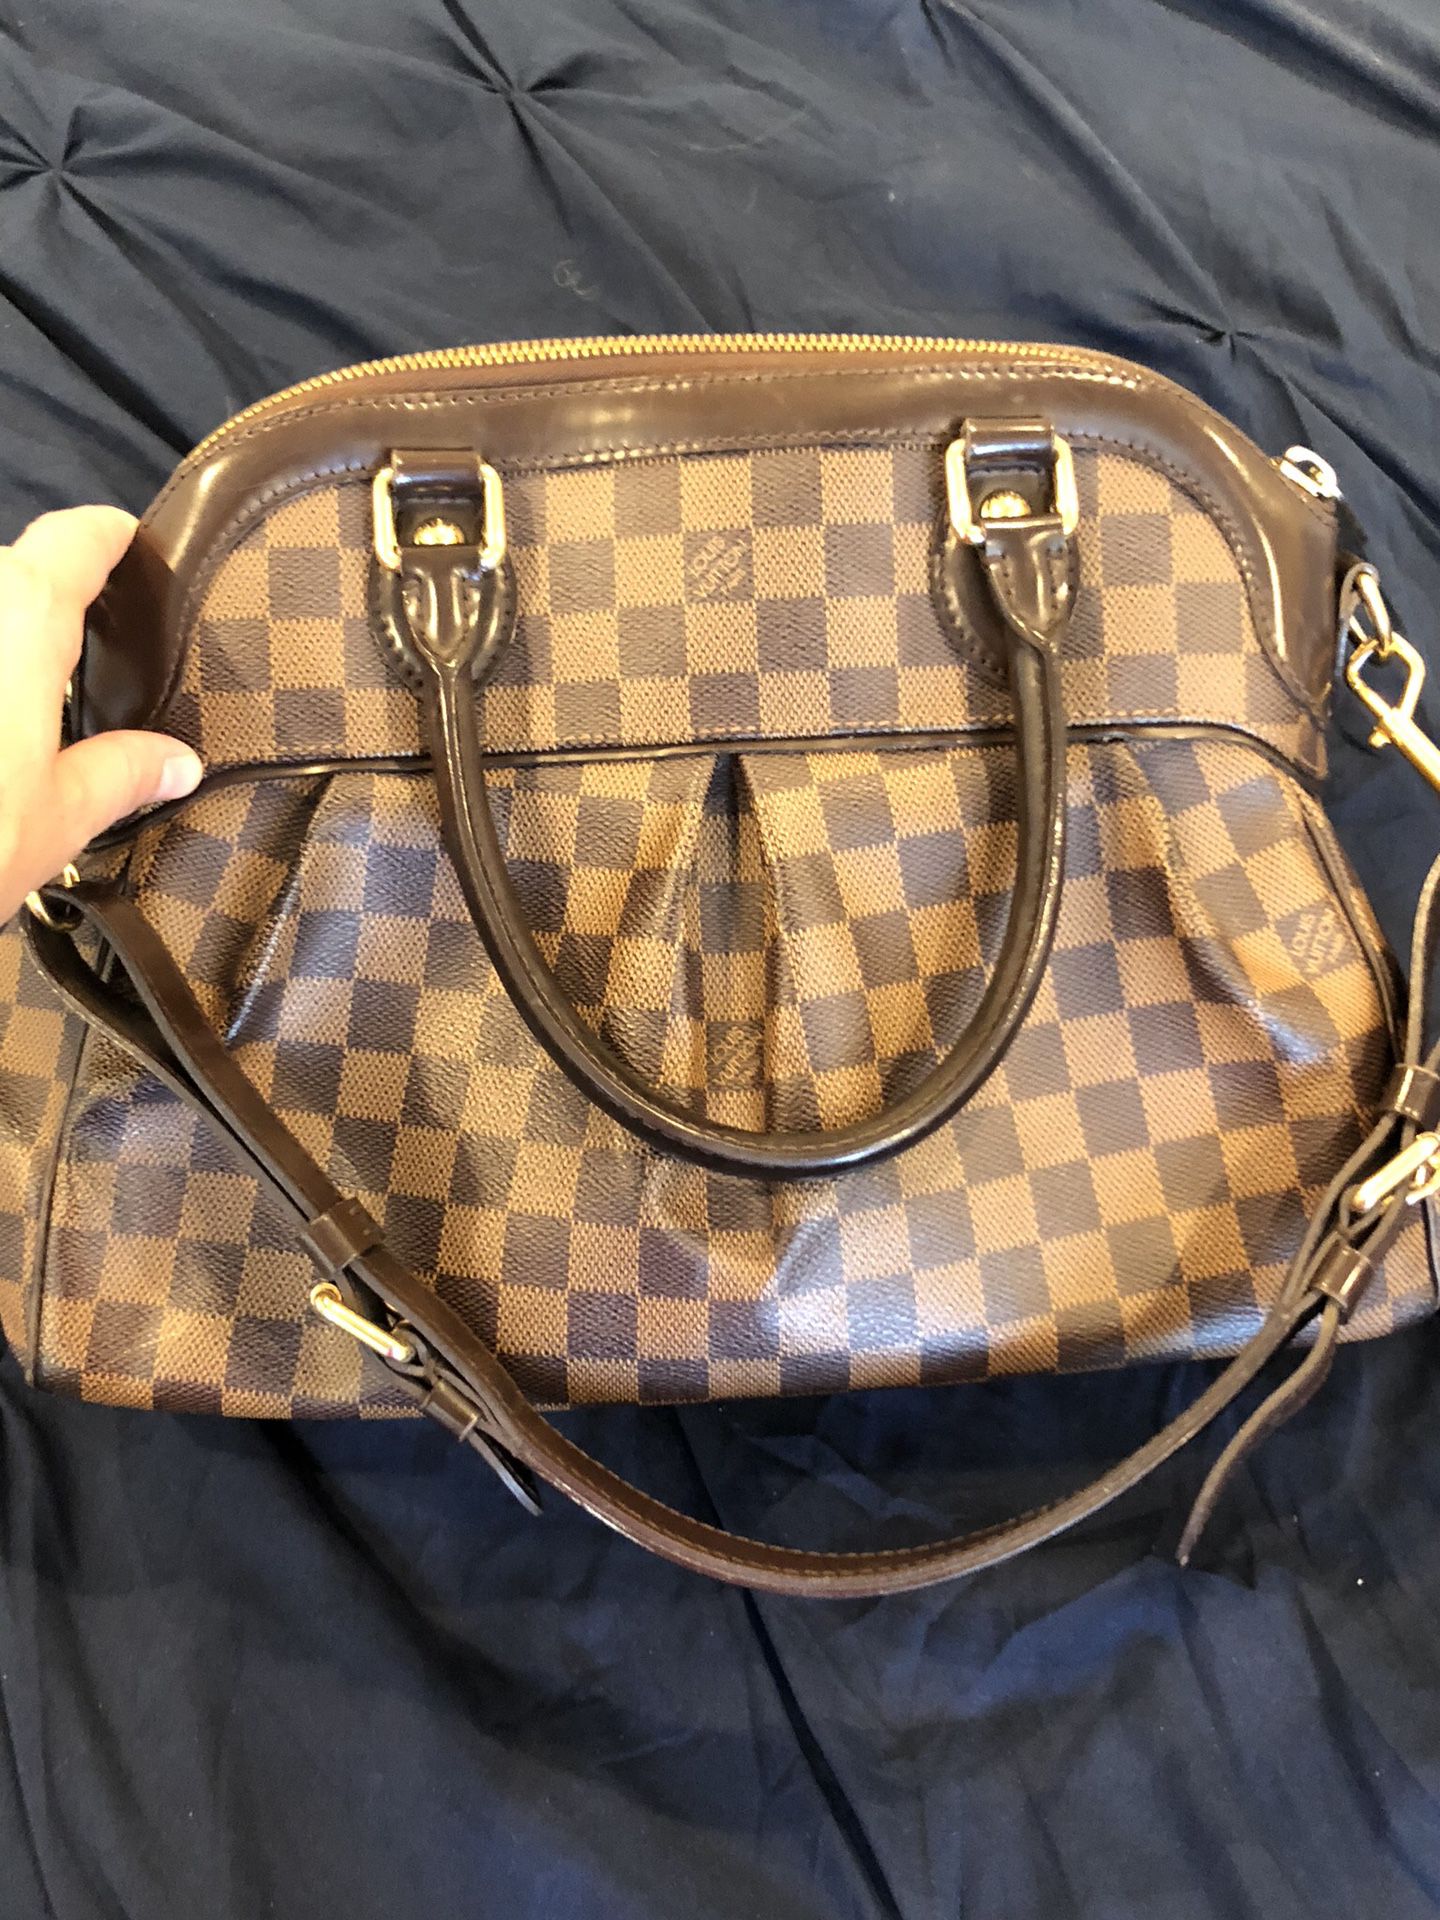 $950 Louis Vuitton Trevi PM with Crossbody Strap for Sale in Mesa